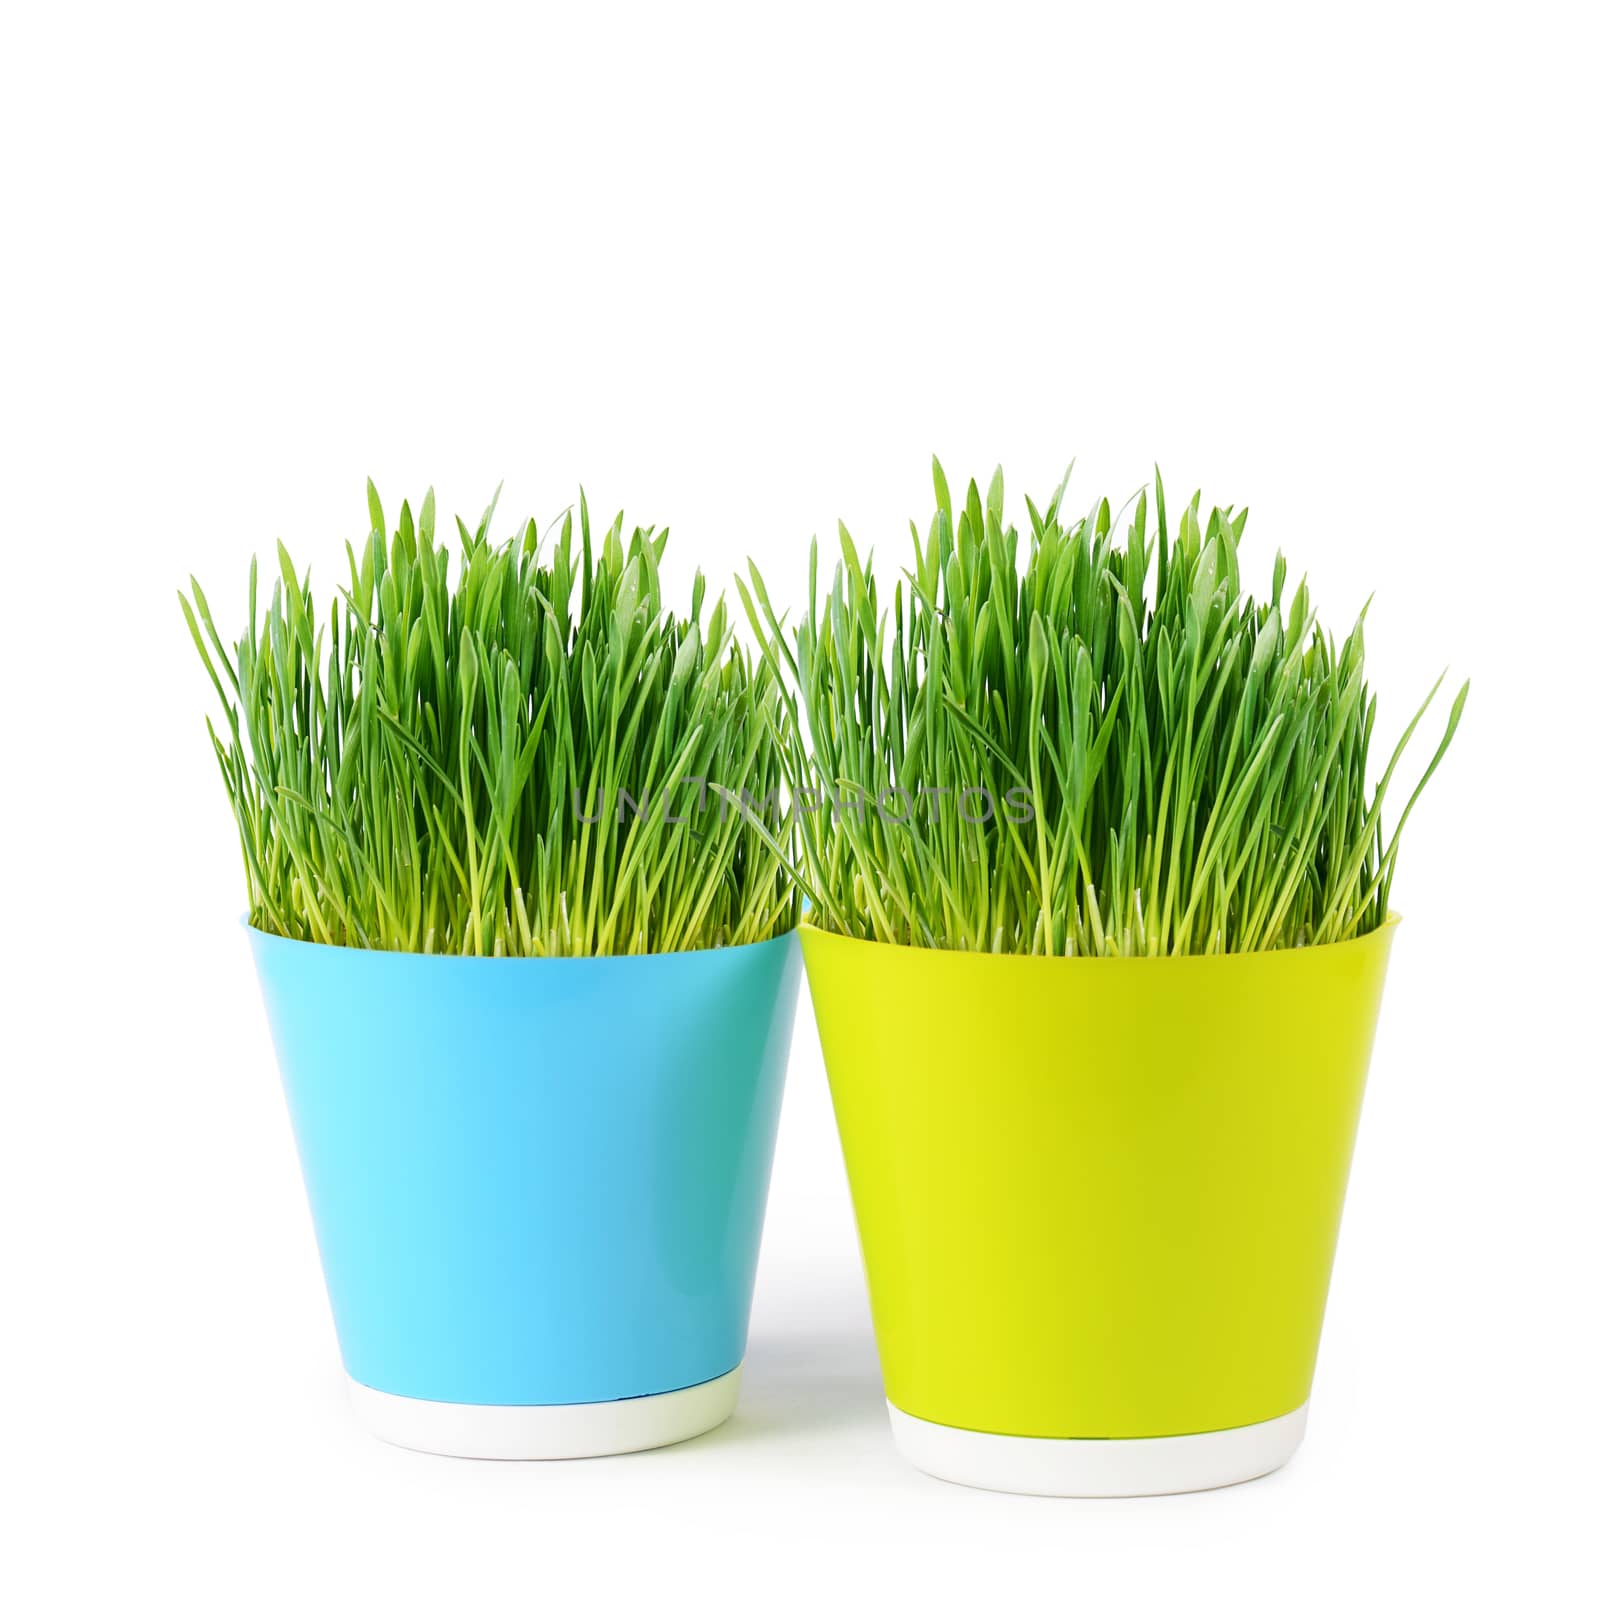 Green grass in pot isolated on white background by SvetaVo